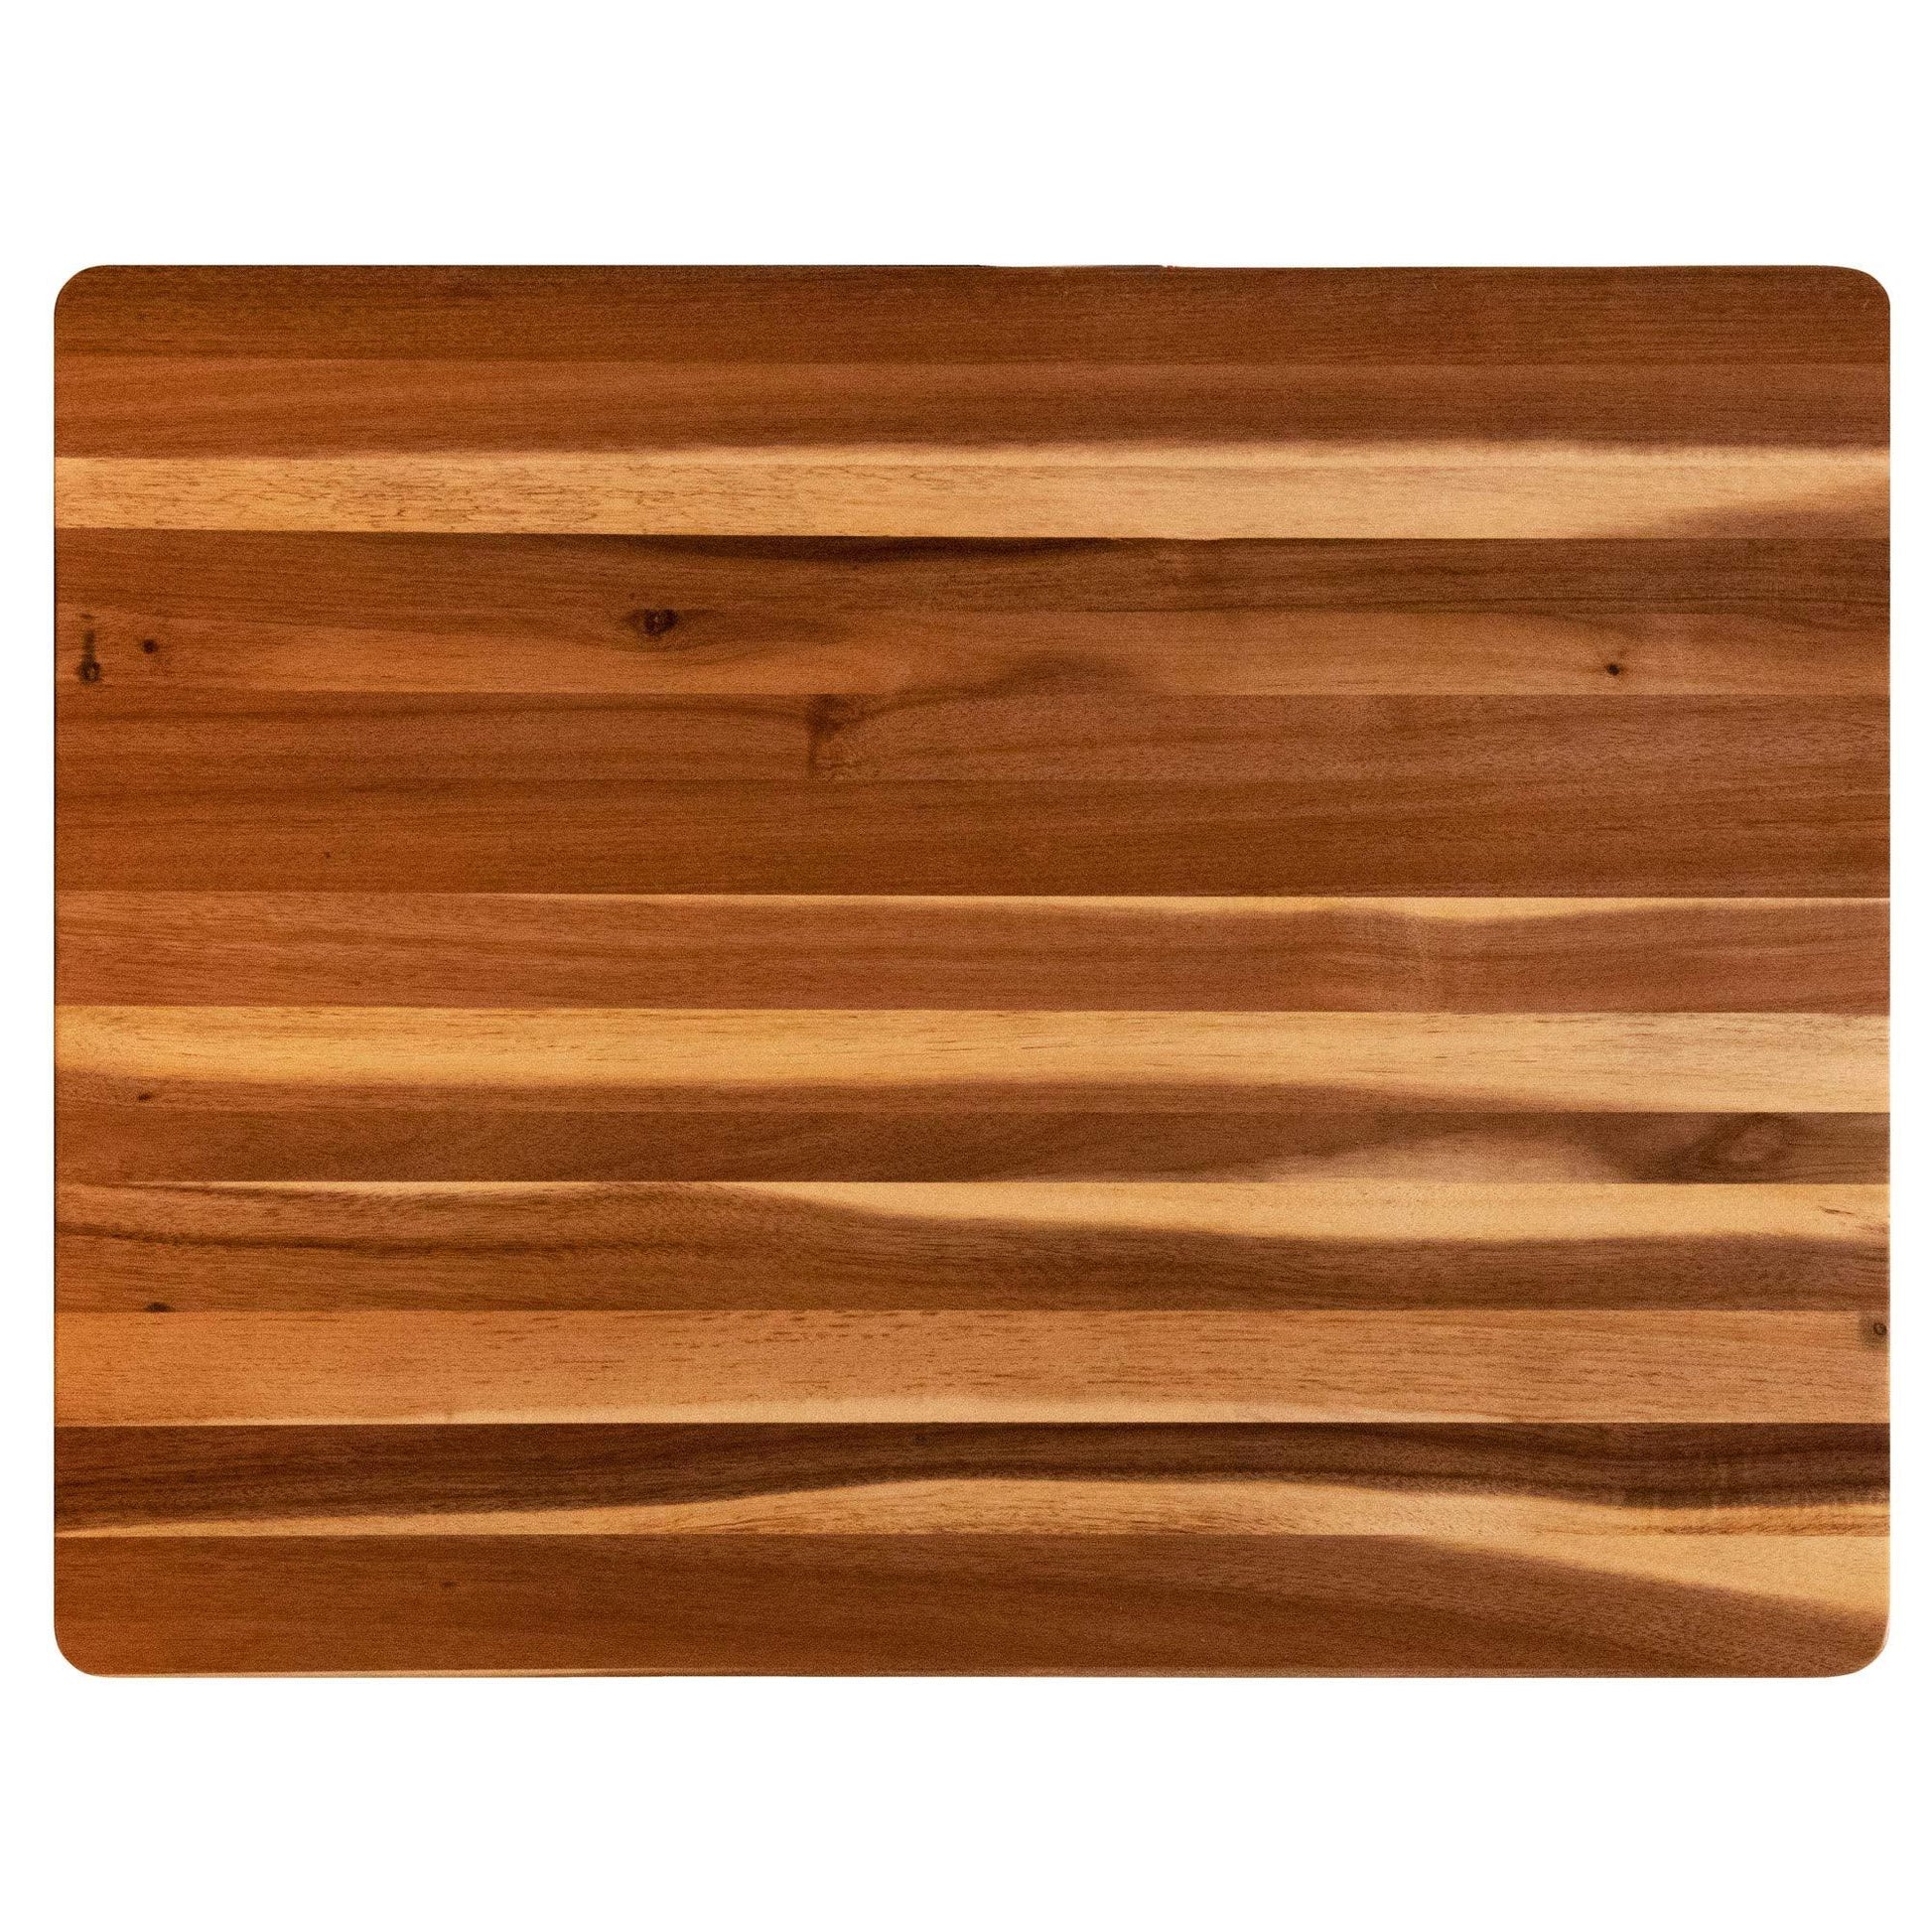 Thirteen Chefs Cutting Boards - Large, Lightweight, 24 x 18 Inch Acacia Wood Chopping Board for Plating, Appetizers, Charcuterie and Kitchen Prep - Portable Cooking Accessories - CookCave